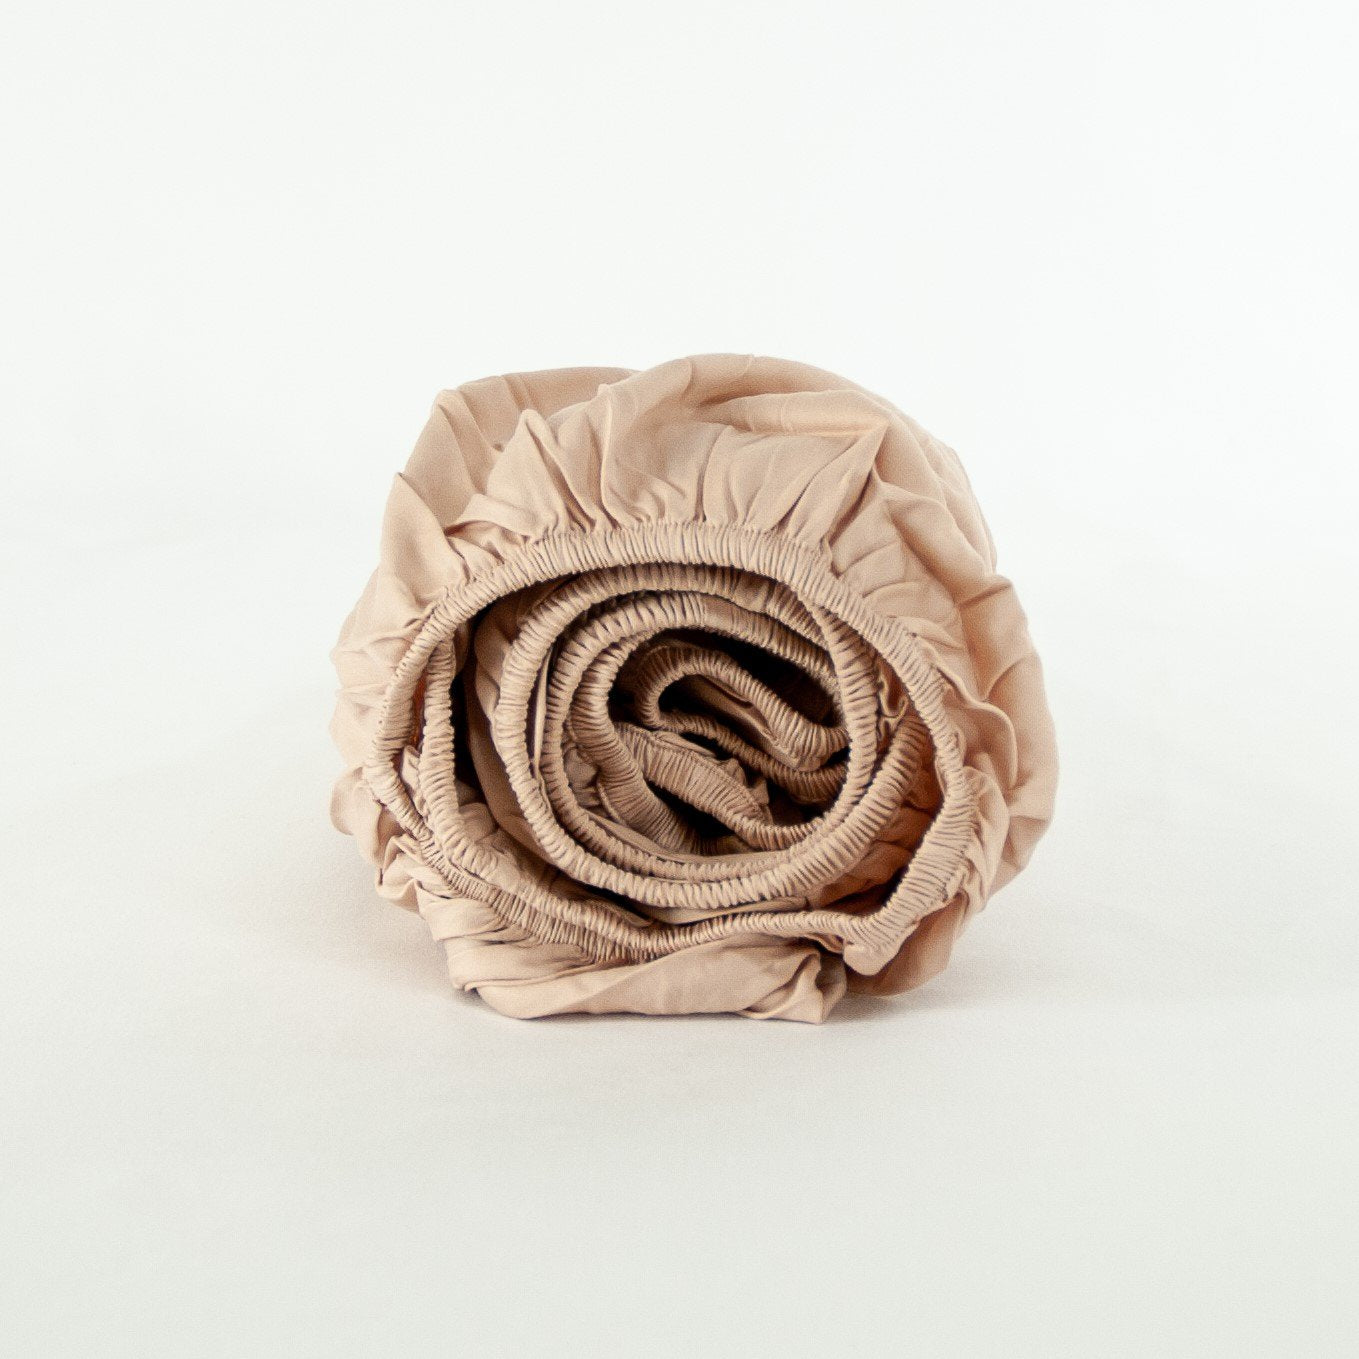 Rolled up organic cotton fitted sheet in blush pink